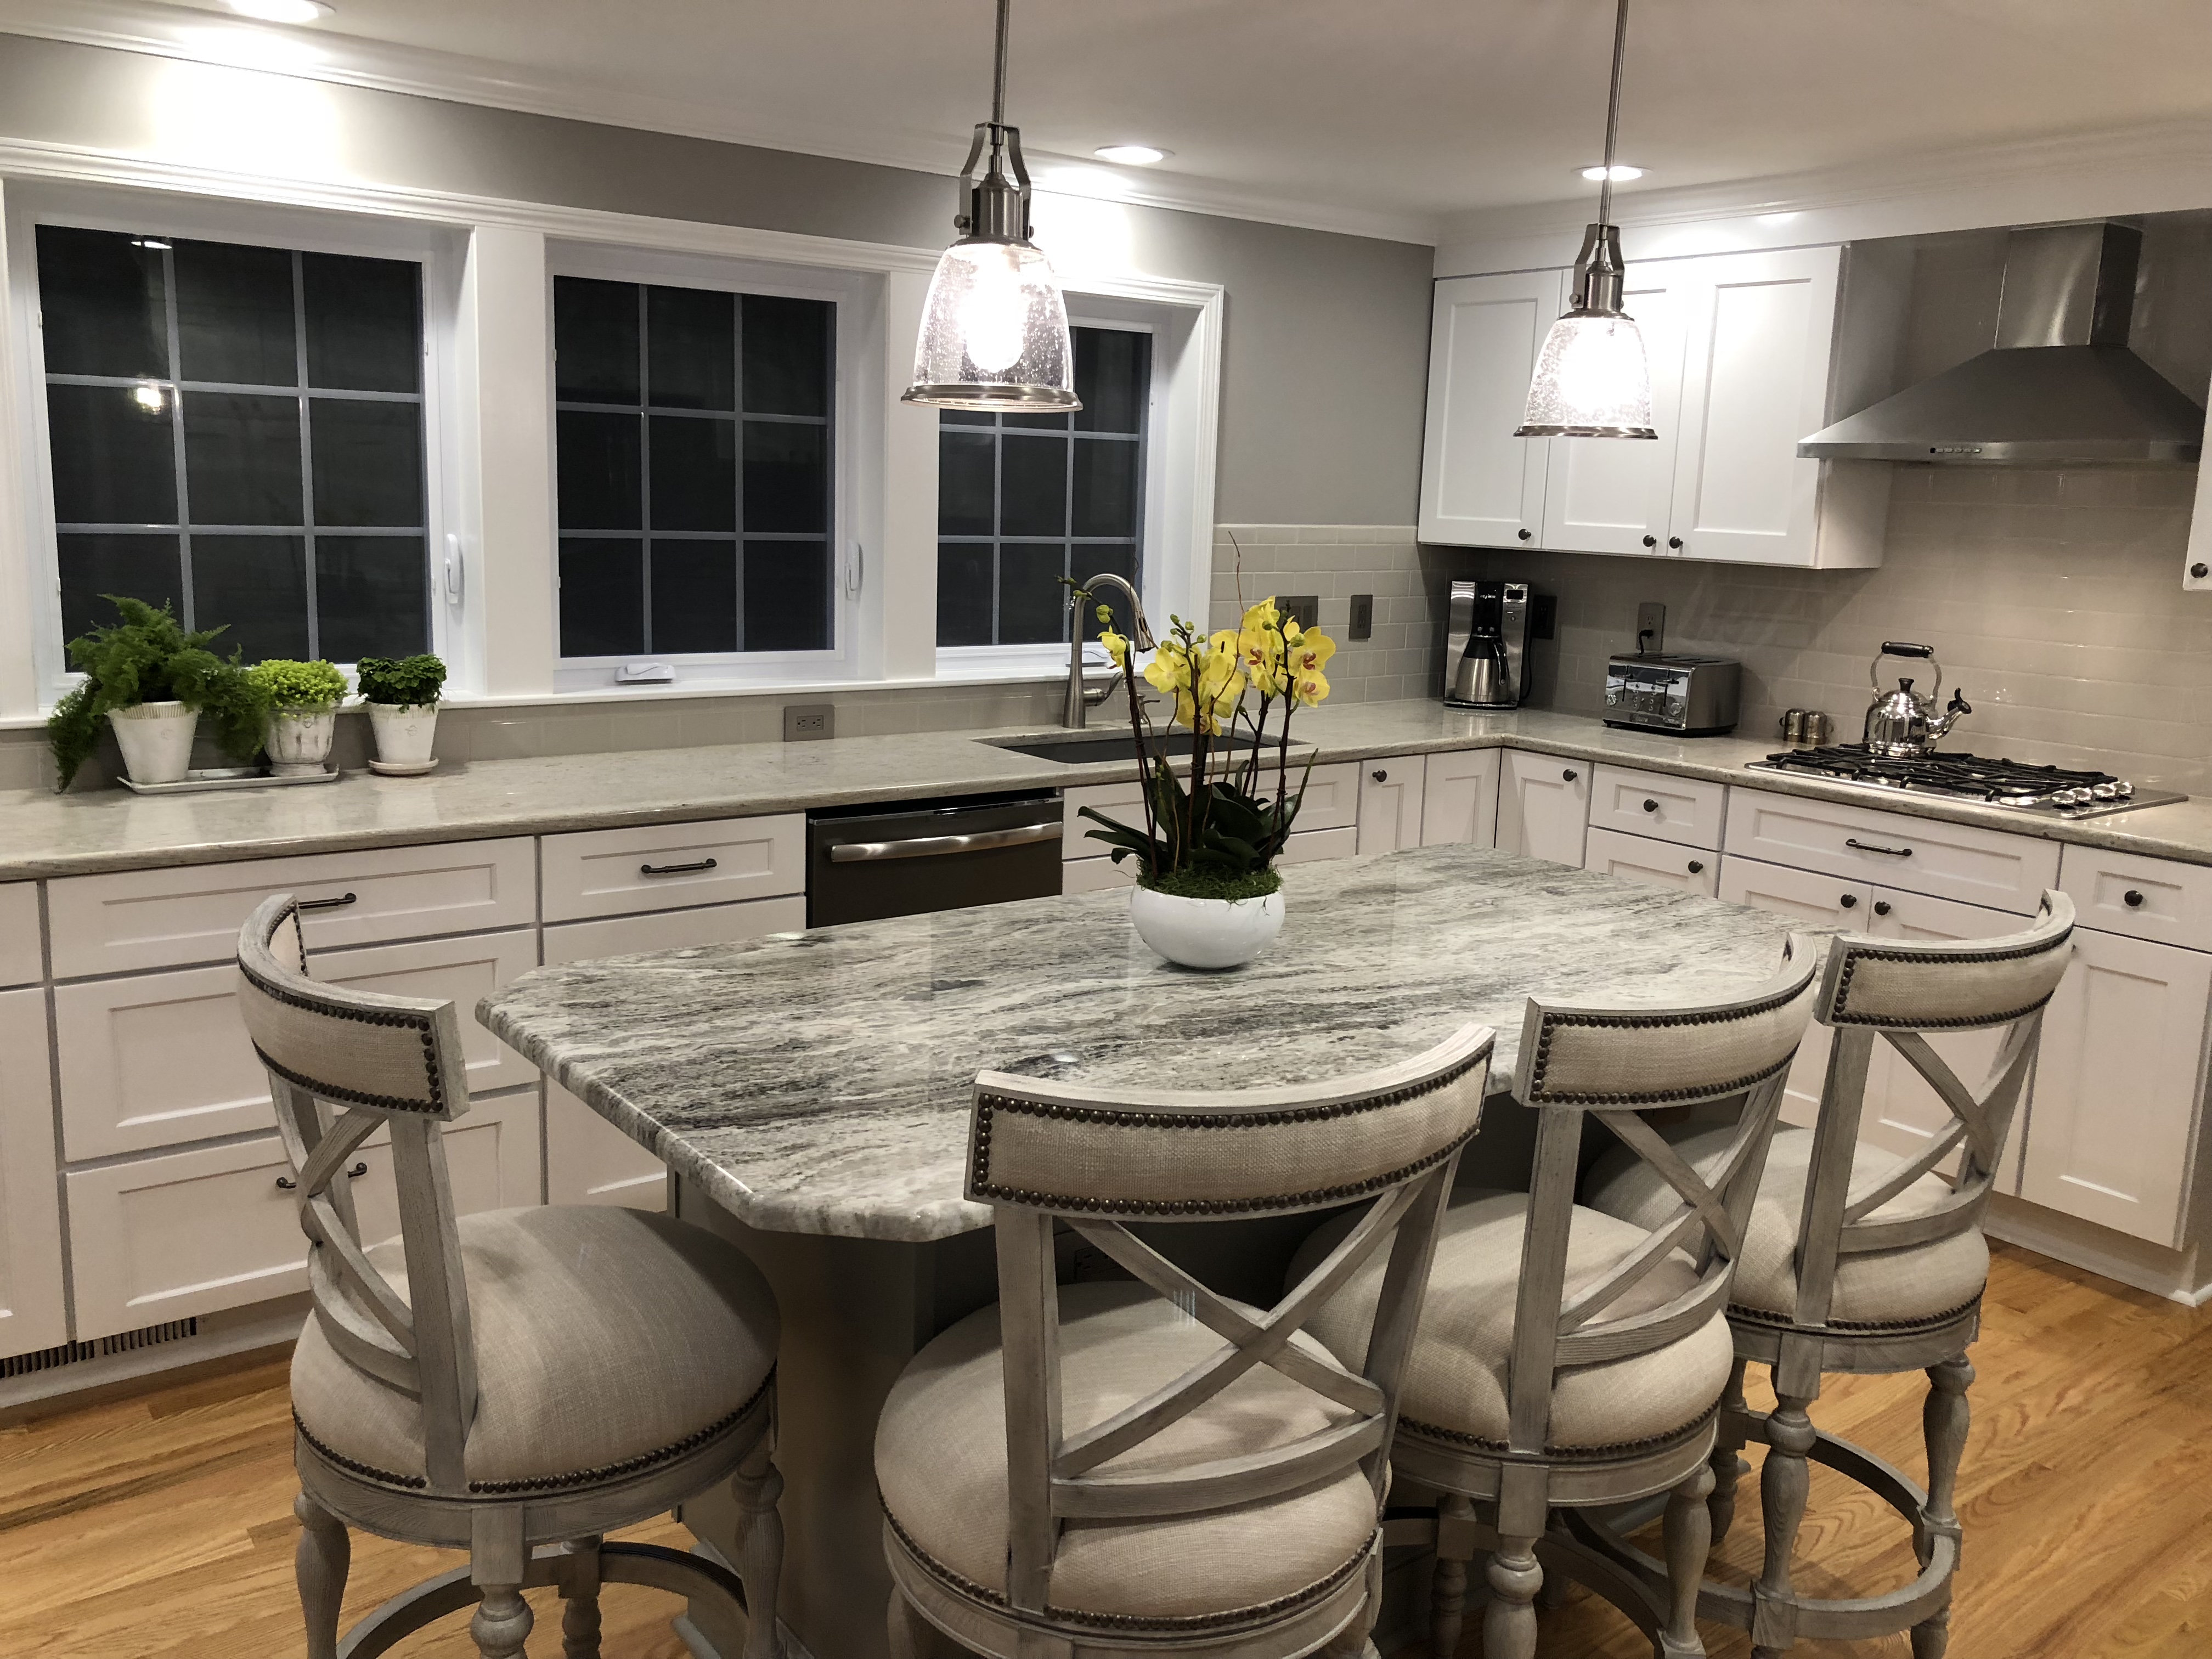 Bringing function, lighting and flow to this newly remodeled kitchen.  Bright, light colors, with plenty of seating and room to move.  